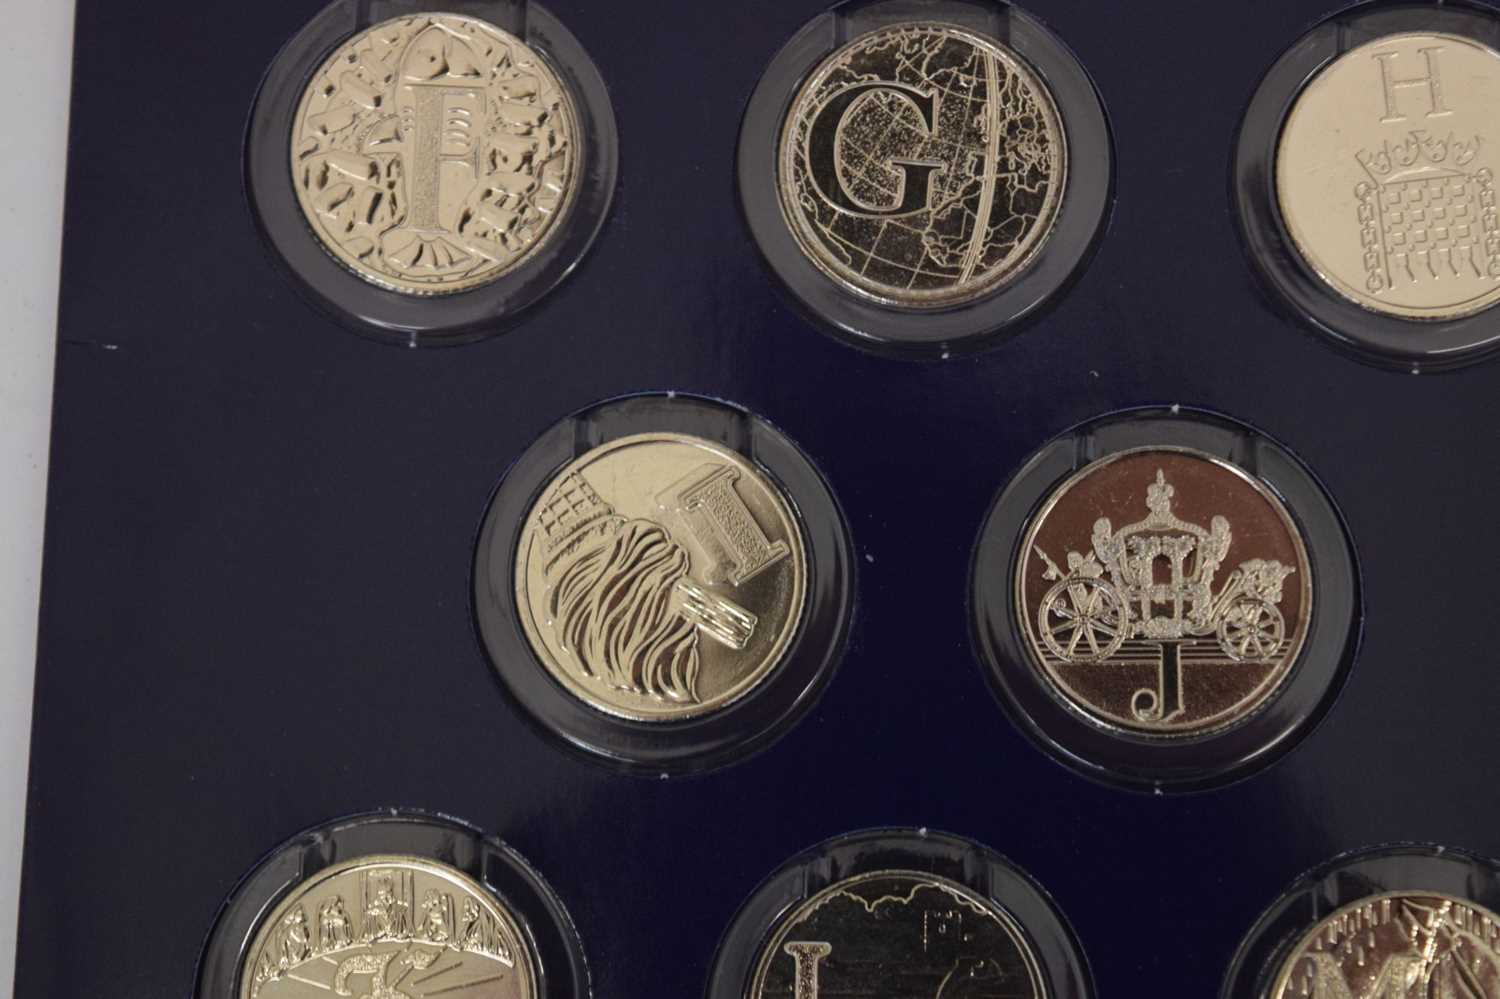 Royal Mint complete set of A-Z of Great Britain 10p coins, 2018 - Image 4 of 8